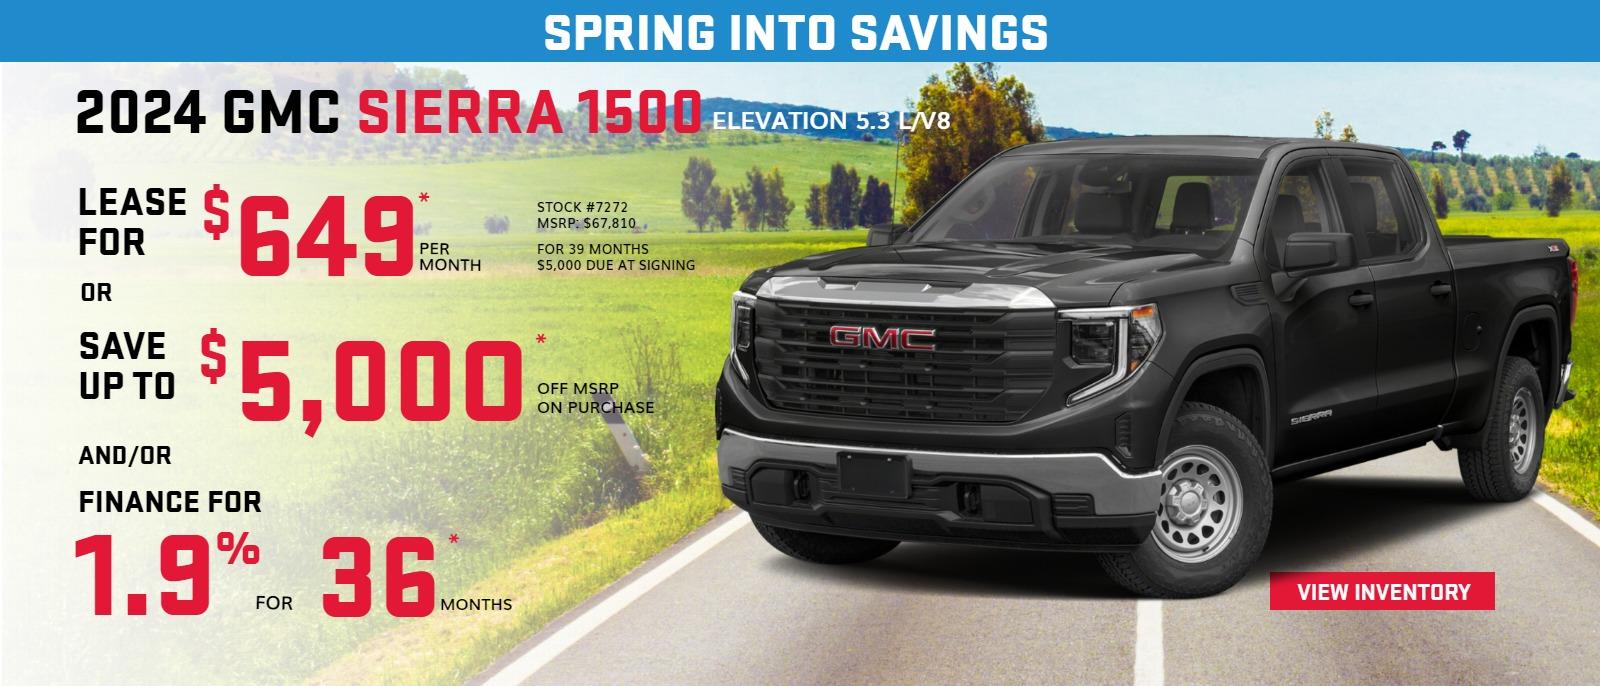 2024 GMC Sierra 1500 Elevation 5.3L/V8
(with Elevation Premium Pkg, Sunroof and X31 Off-Road Pkg)
Stock #7272
MSRP $67,810
Lease $649*/39 Mos.

Disclosure Popup:
*$5,000 Downpayment
*$3,000 McGuire Discount
*$2,250 Buick GMC Loyalty
*$500 1st Responder or Military

OR

Save Up to $5,000*
Disclosure Popup:
*$3,000 McGuire Discount
*$2,000 GMC Purchase Cash
*$500 1st Responder or Military

OR

Finance 1.90%-36months
Disclosure Popup:
*$3,000 McGuire Discount
*$500 1st Responder or Military